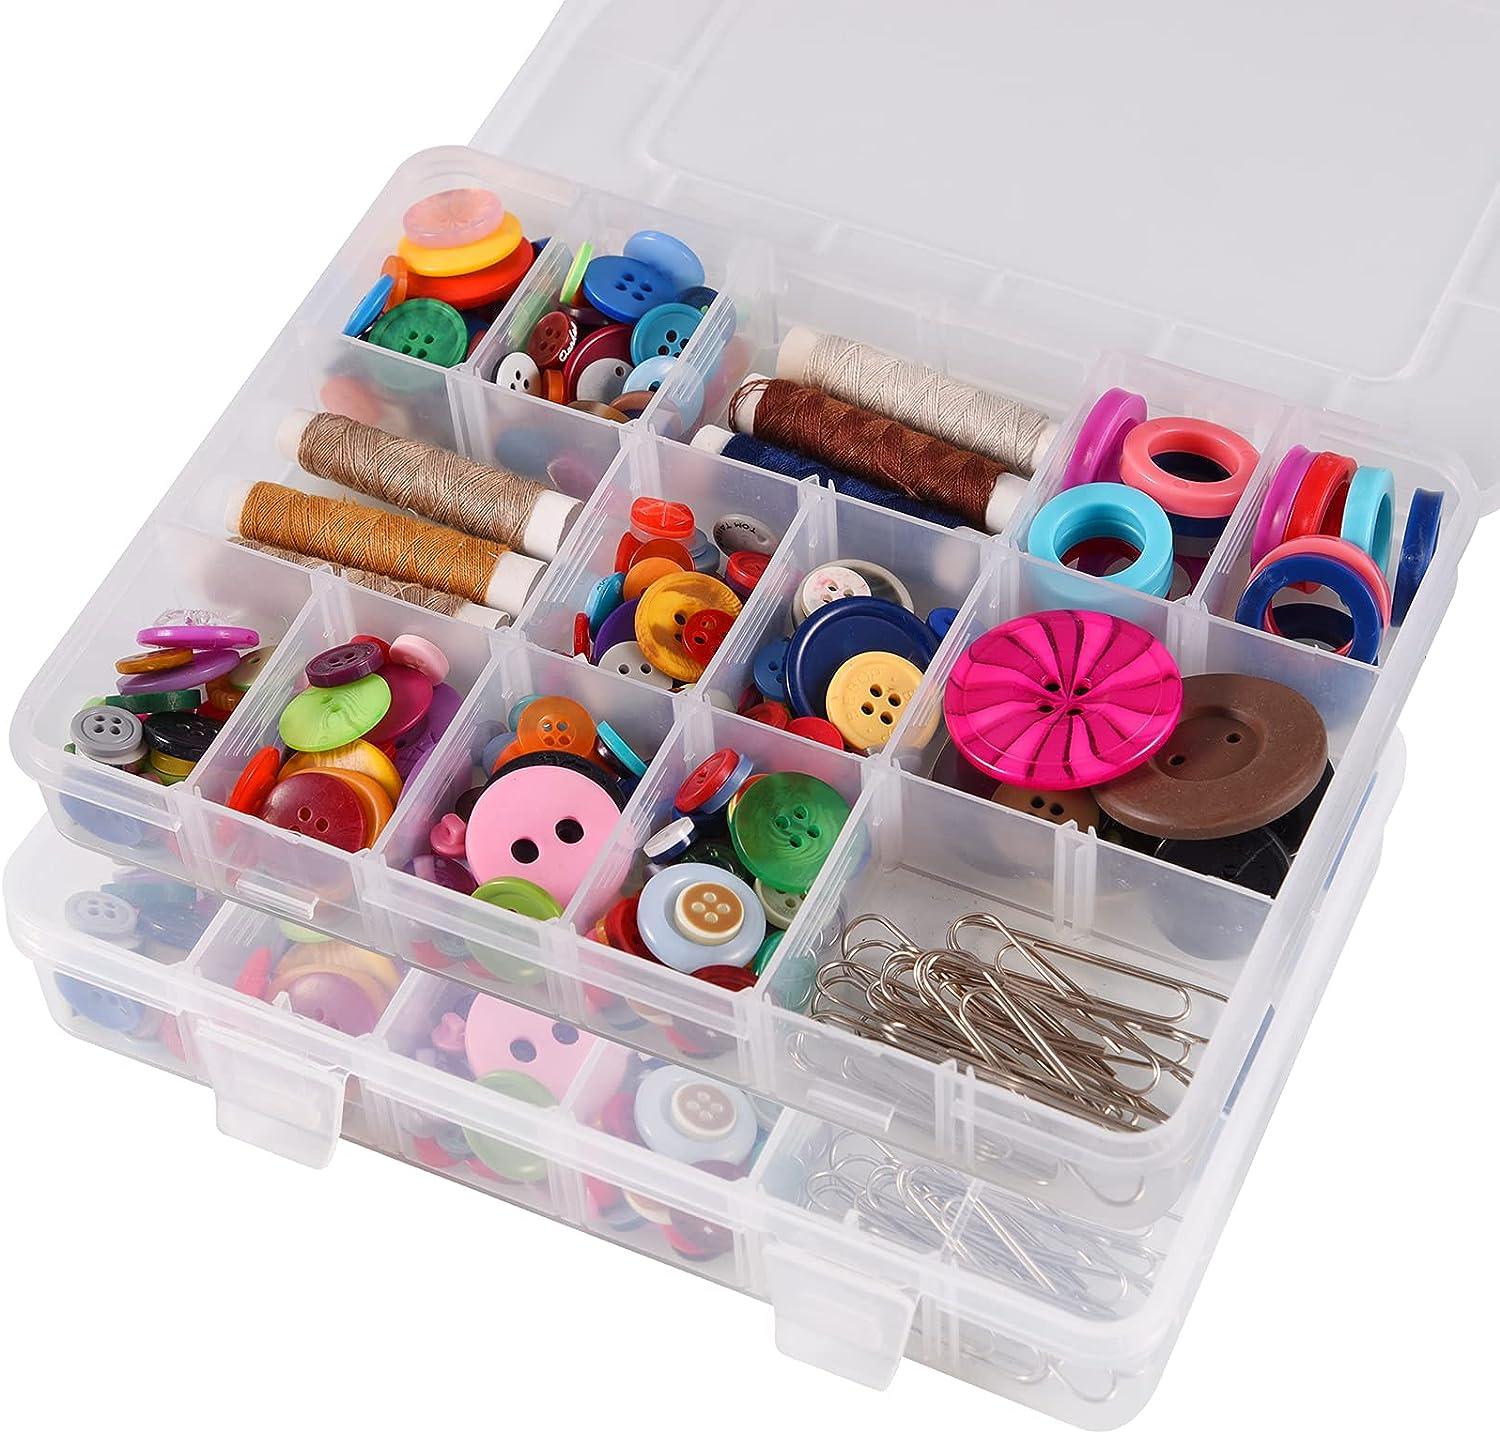 18 Grids Plastic Organizer Box with Dividers, Exptolii Clear Compartment  Container Storage for Washi Tapes Beads Crafts Jewelry Fishing Tackles